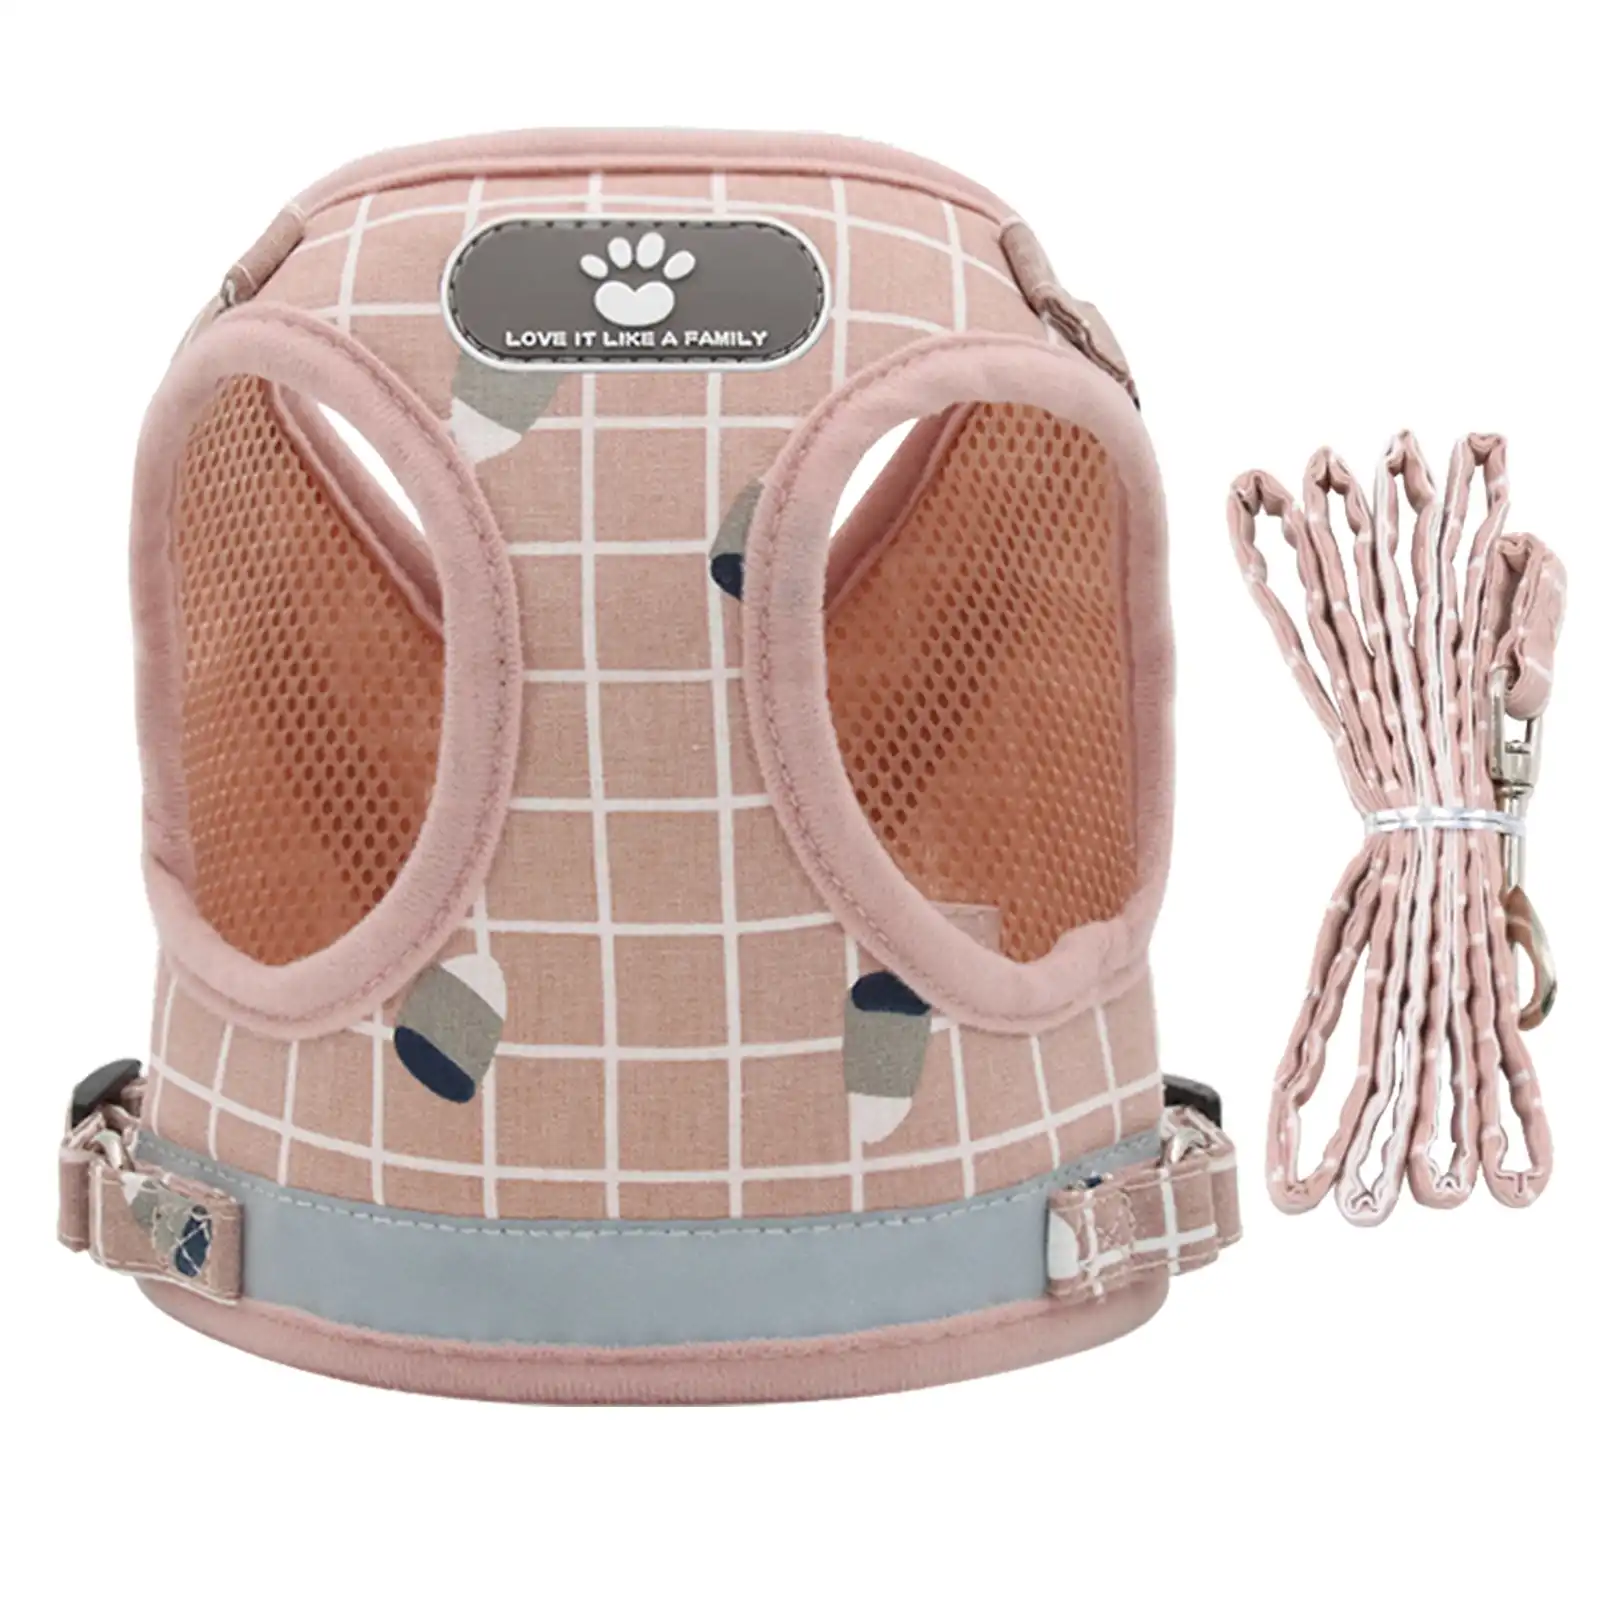 Furbulous No Pull Cat Small Dog Harness and Lead Set Adjustable Reflective Step-in Vest Harnesses Mesh Padded Plaid Escape Proof Puppy Jacket - Pink S